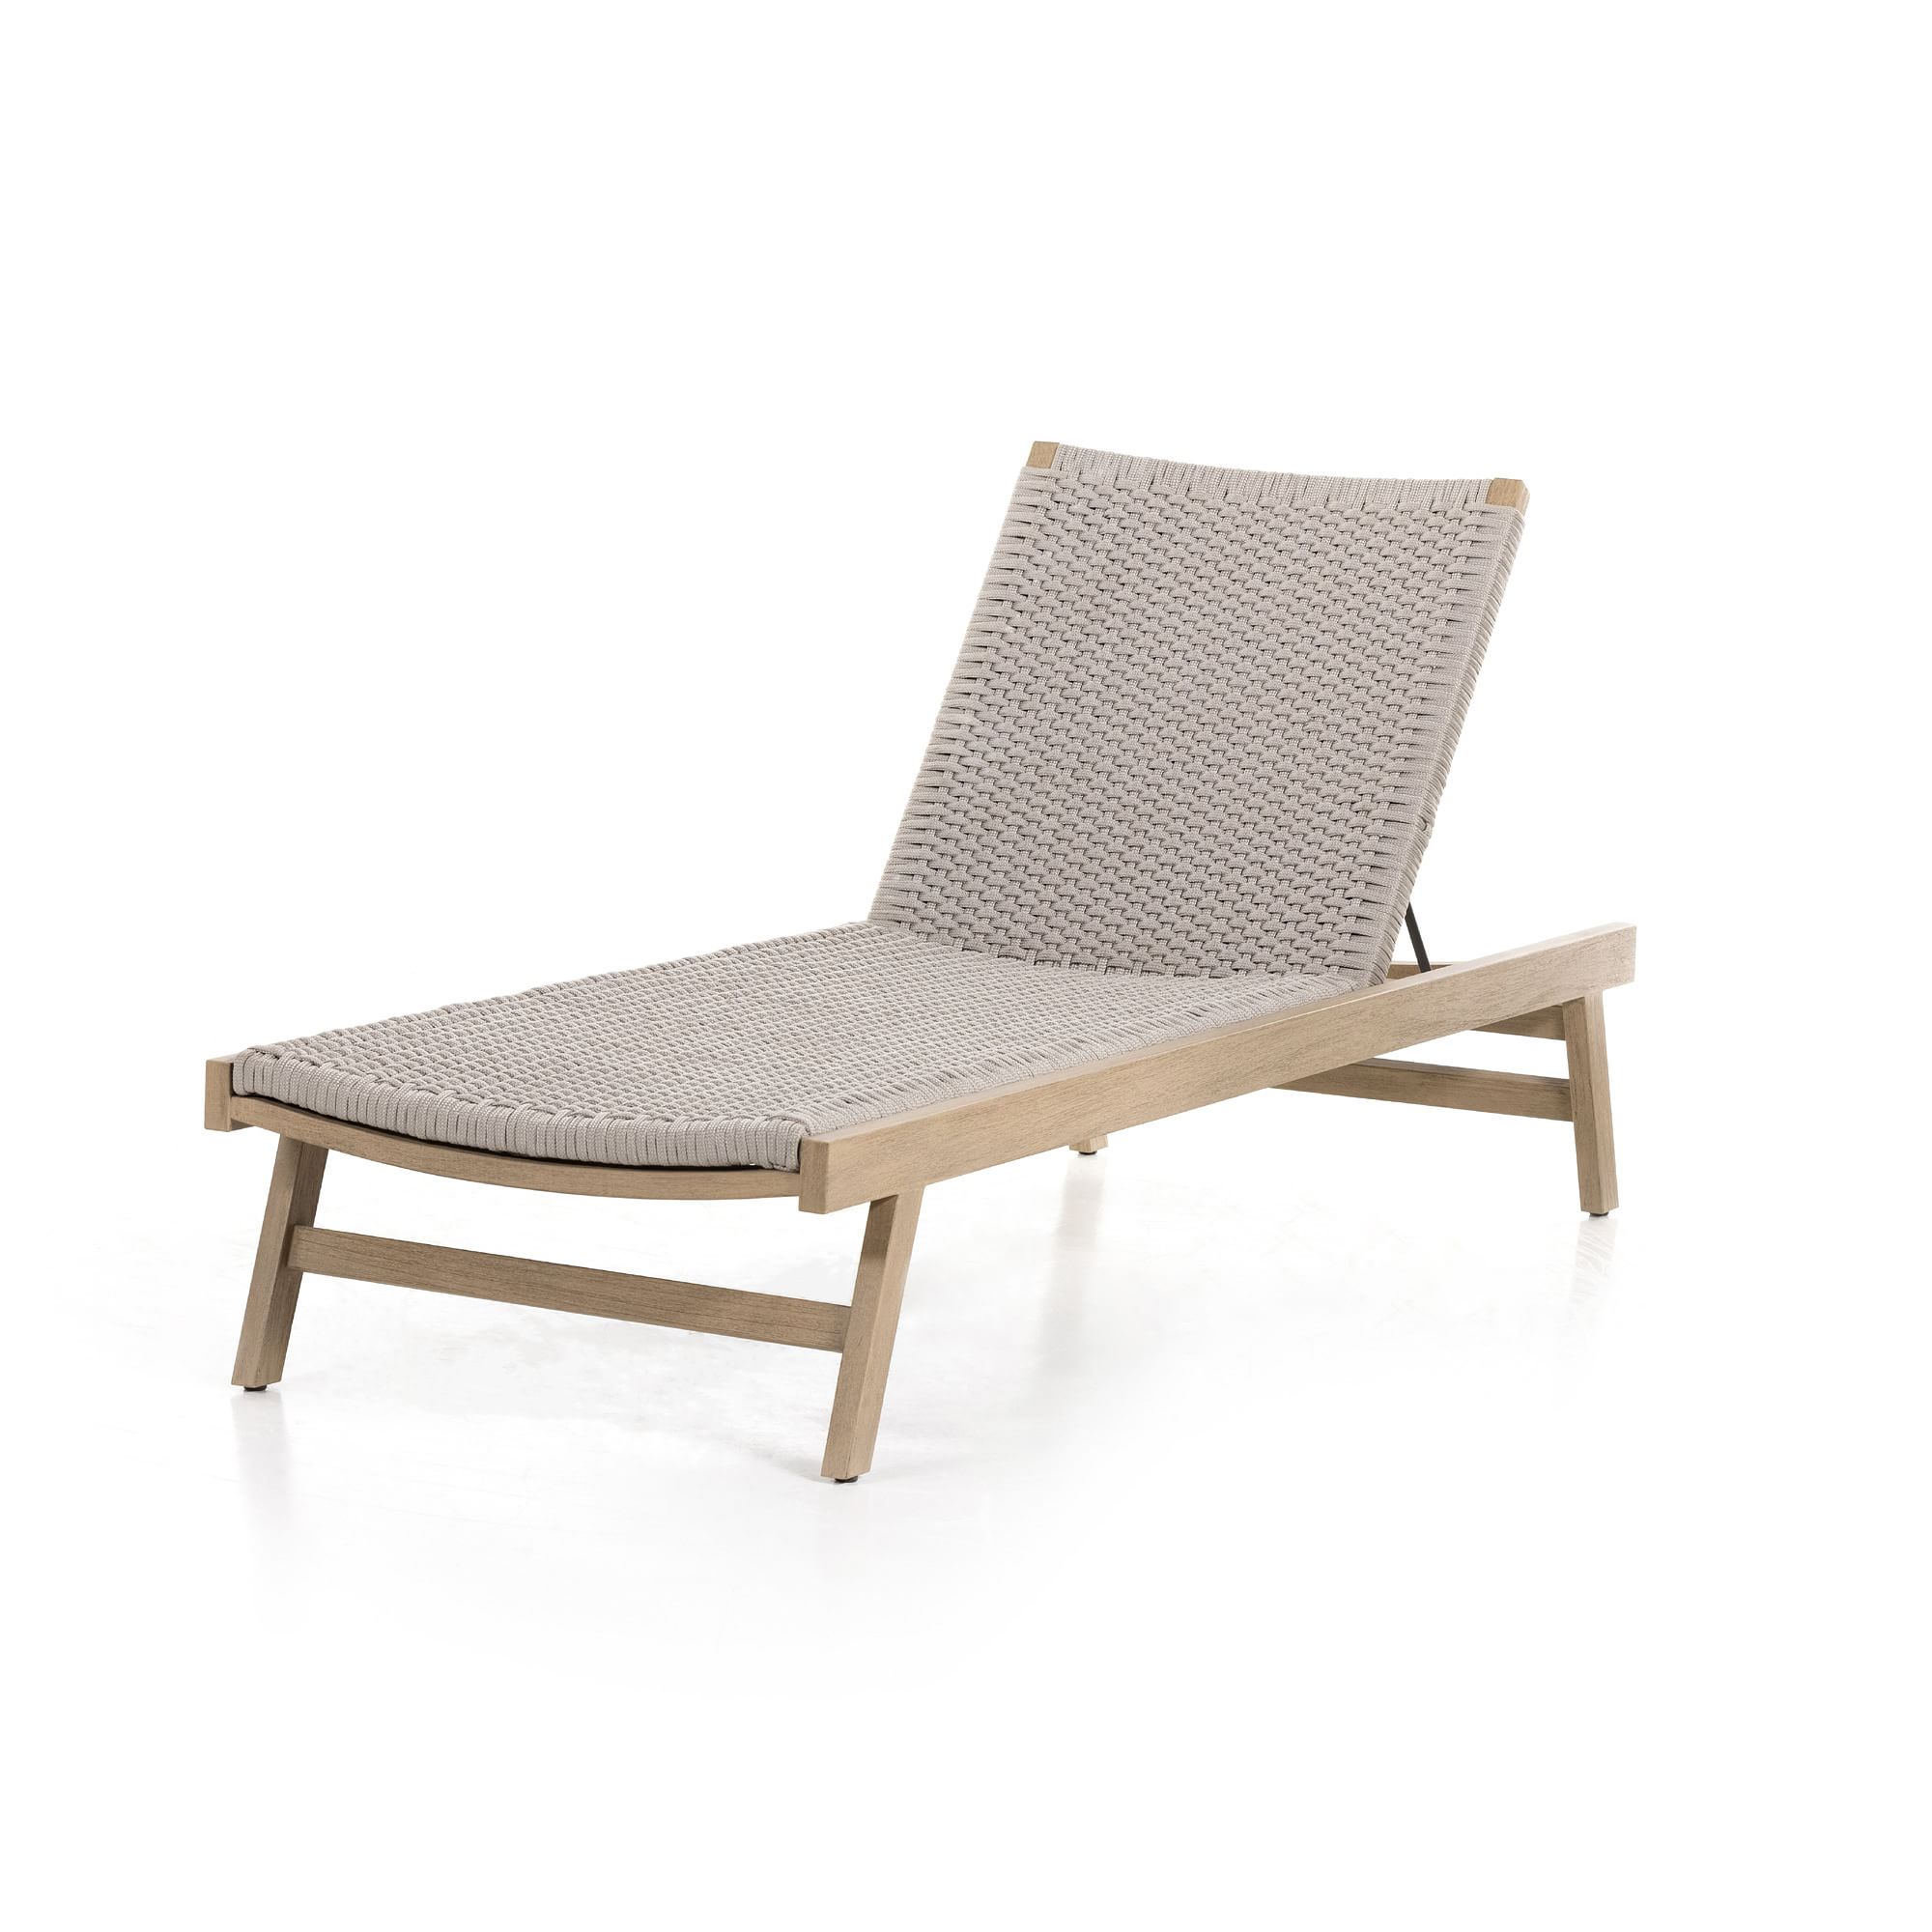 Catania Outdoor Rope Chaise Lounge | West Elm